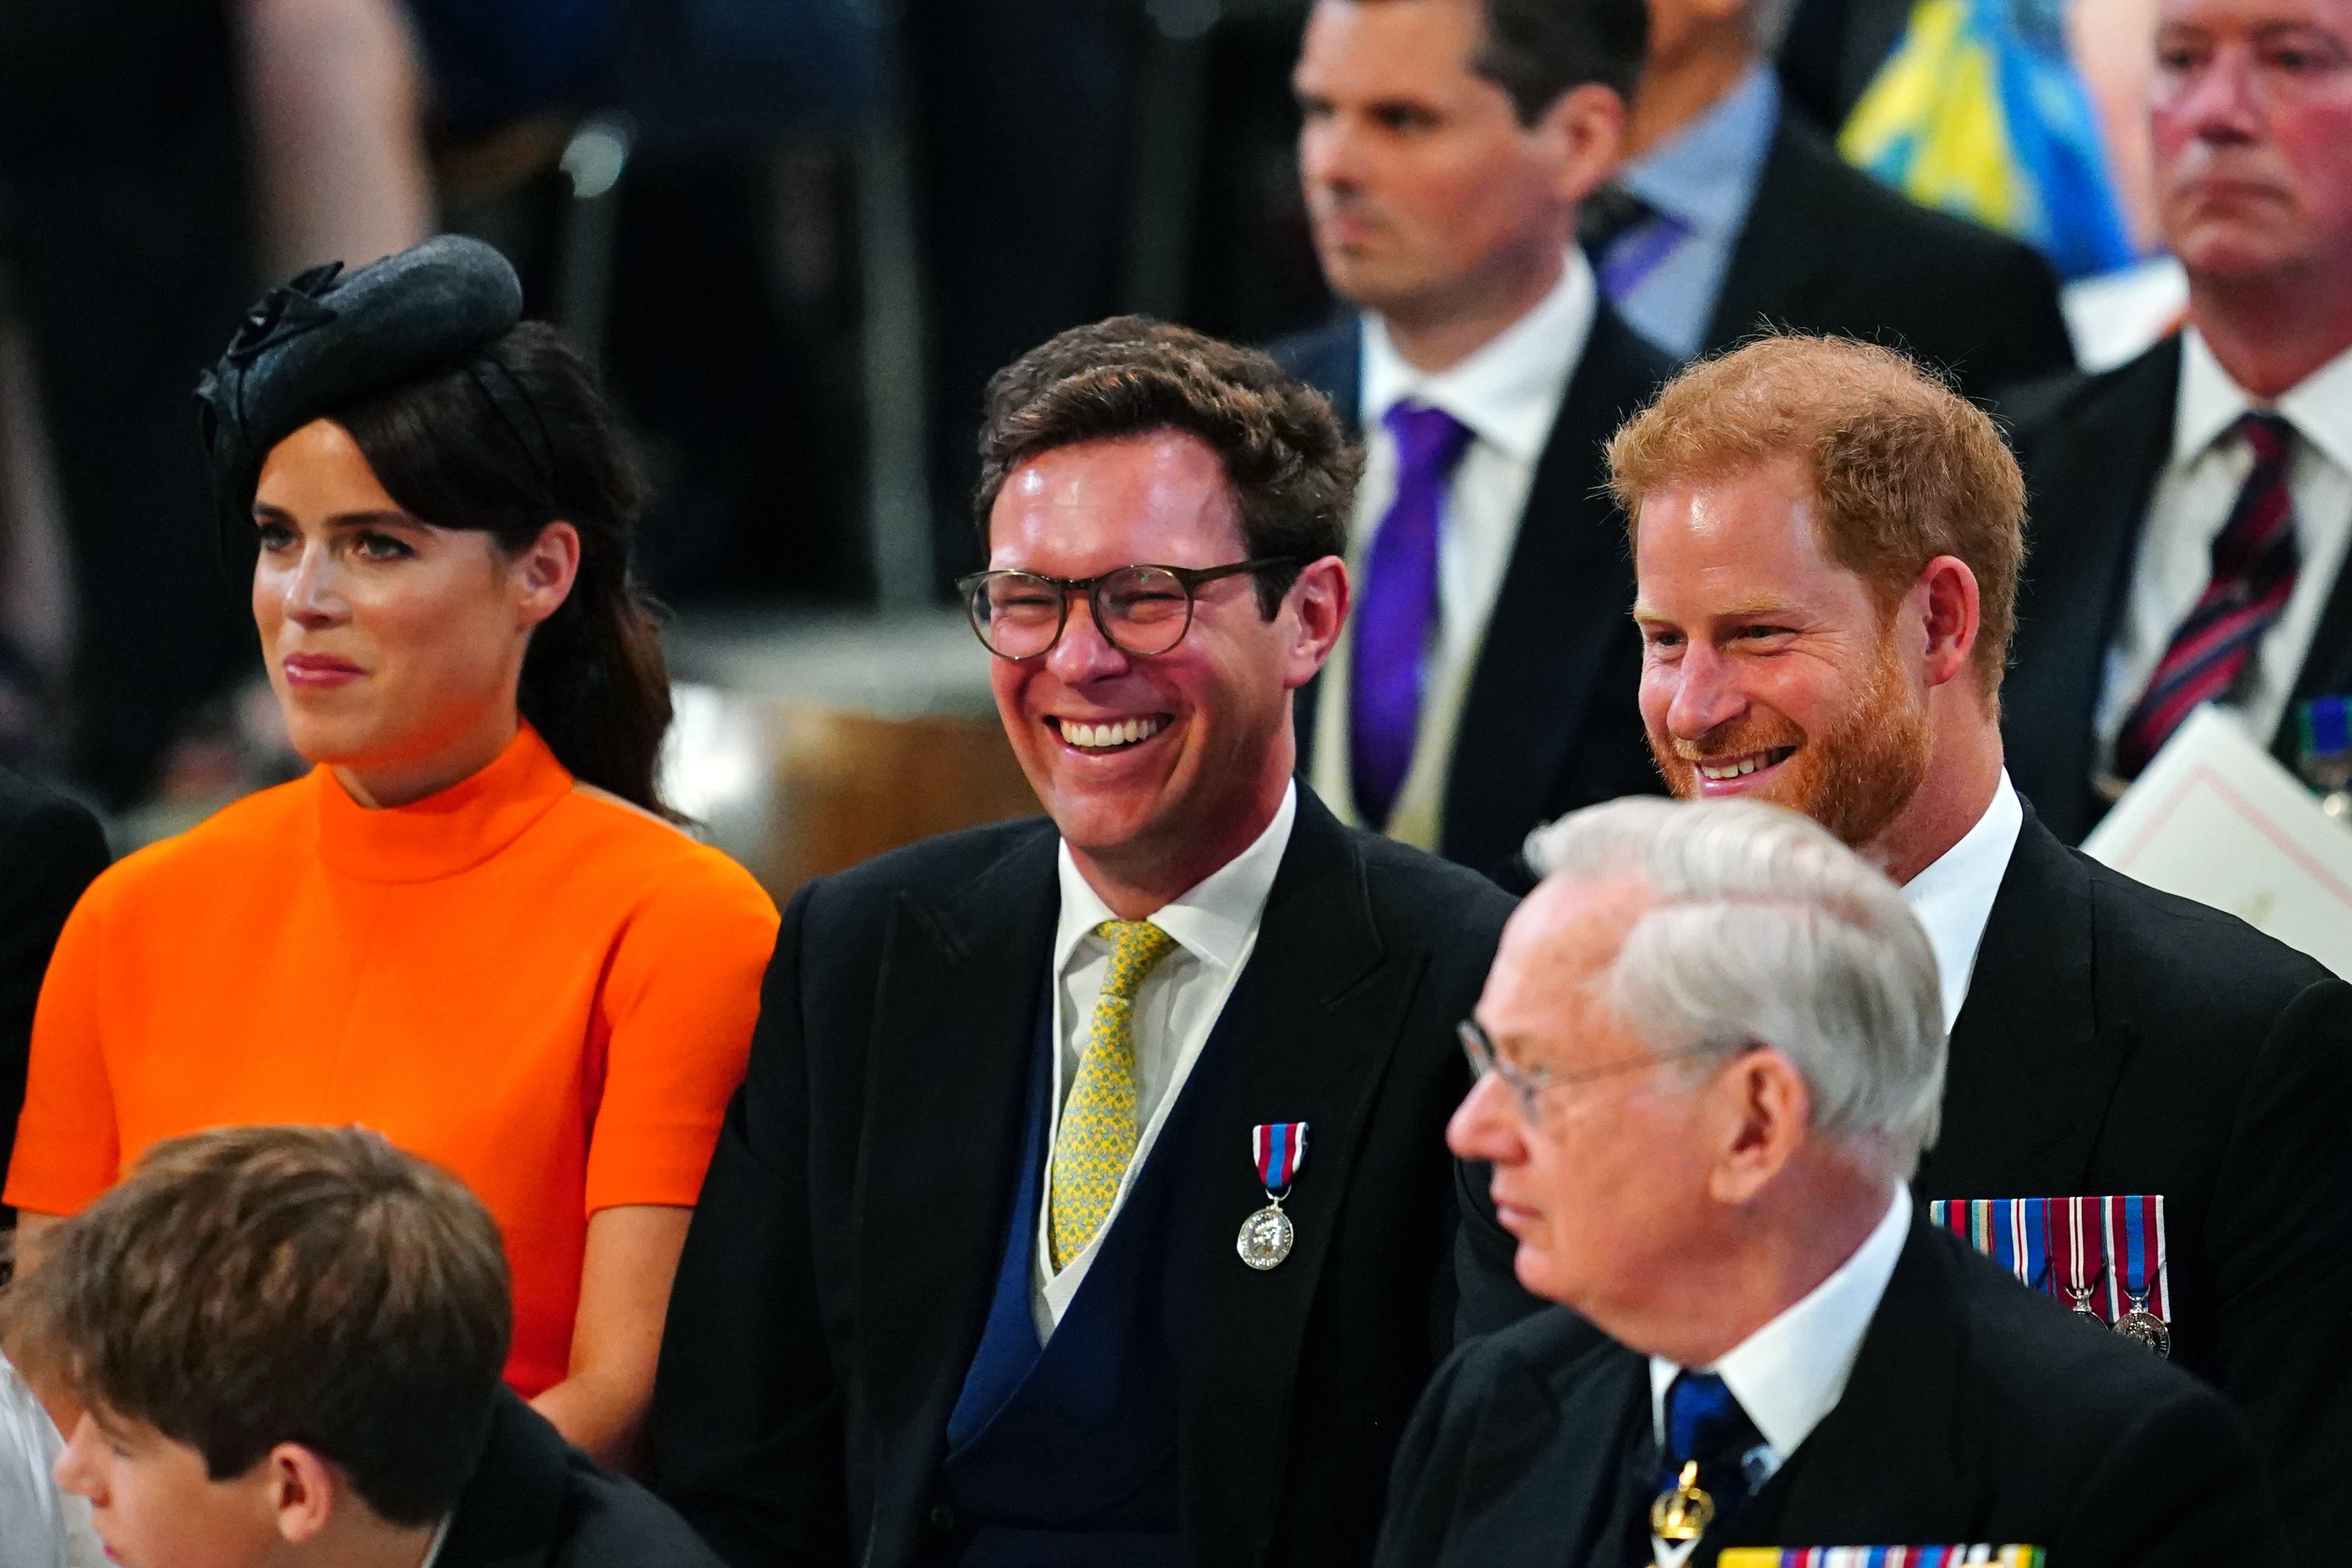 Princess Eugenie, Jack Brooksbank, and Prince Harry attend the National Service of Thanksgiving to Celebrate the Platinum Jubilee of the Queen at St Paul's Cathedral on June 3, 2022, in London, England. | Source: Getty Images